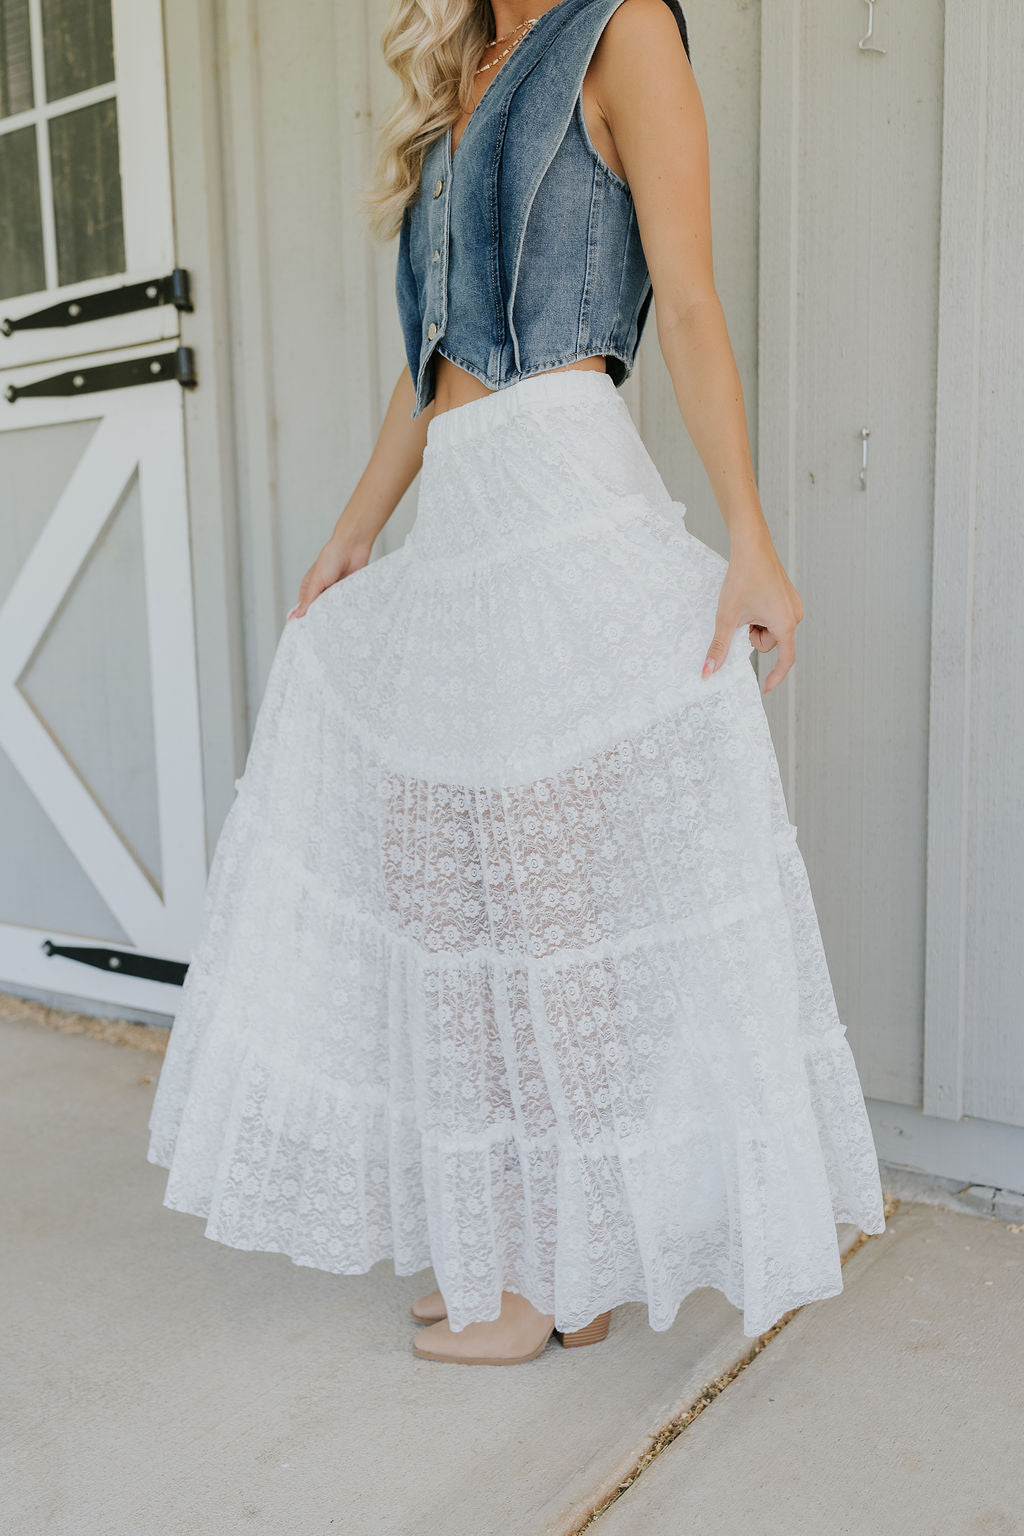 Lower body side view of female model wearing the Shiloh White Lace Maxi Skirt that has white lace fabric, half lining, and an elastic waist. 